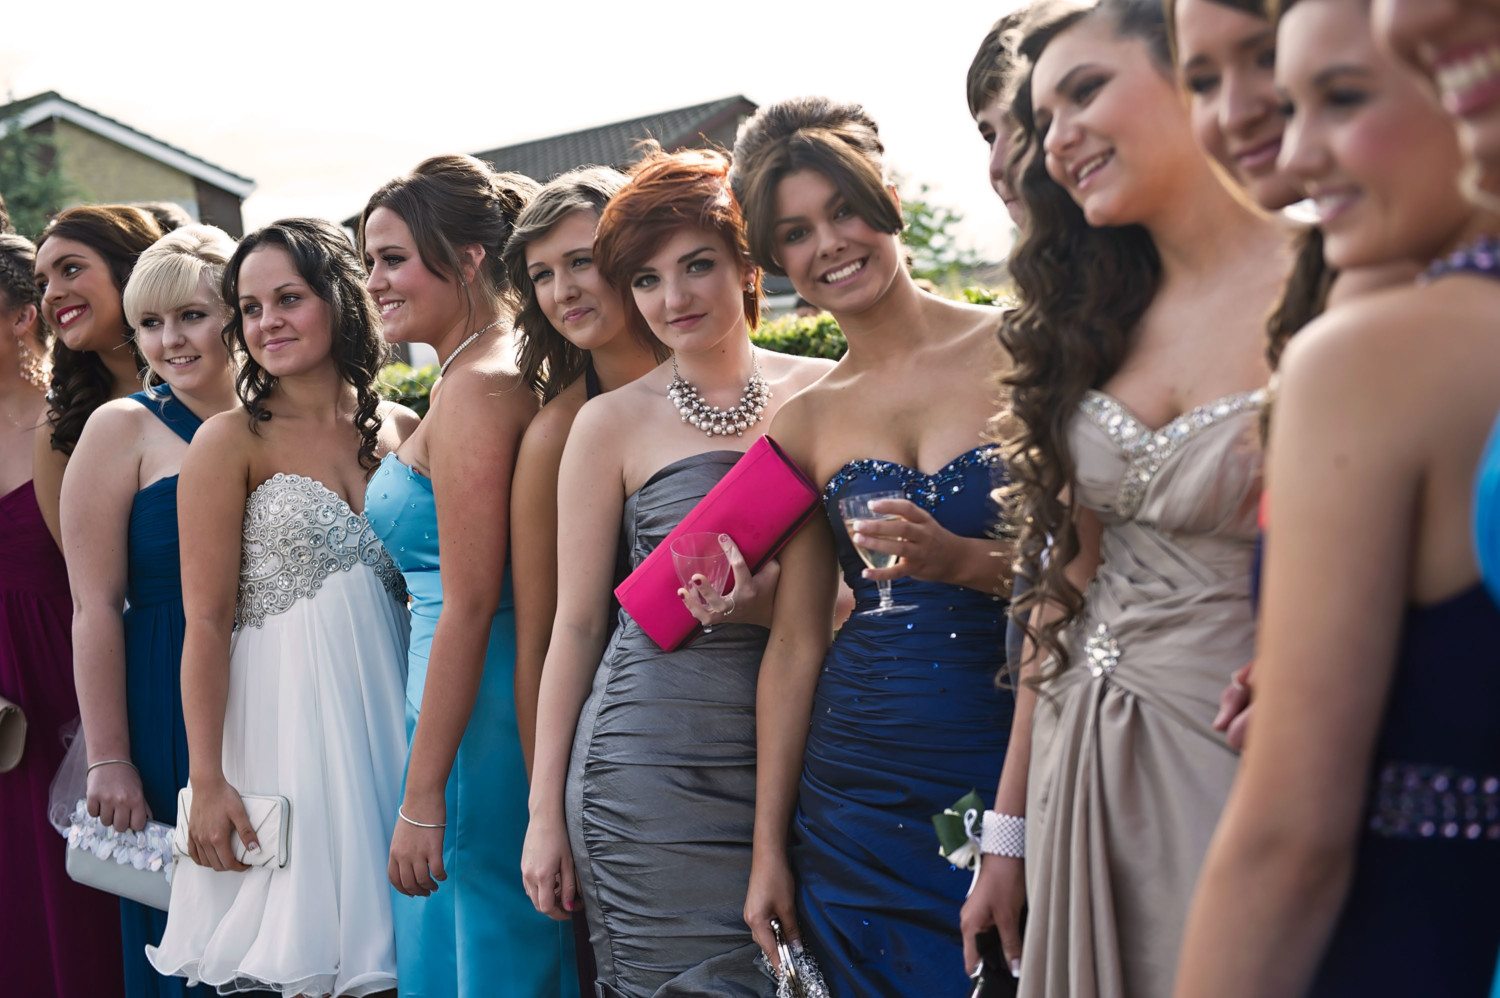 Students Participate In Their School's Final Year Prom Dance